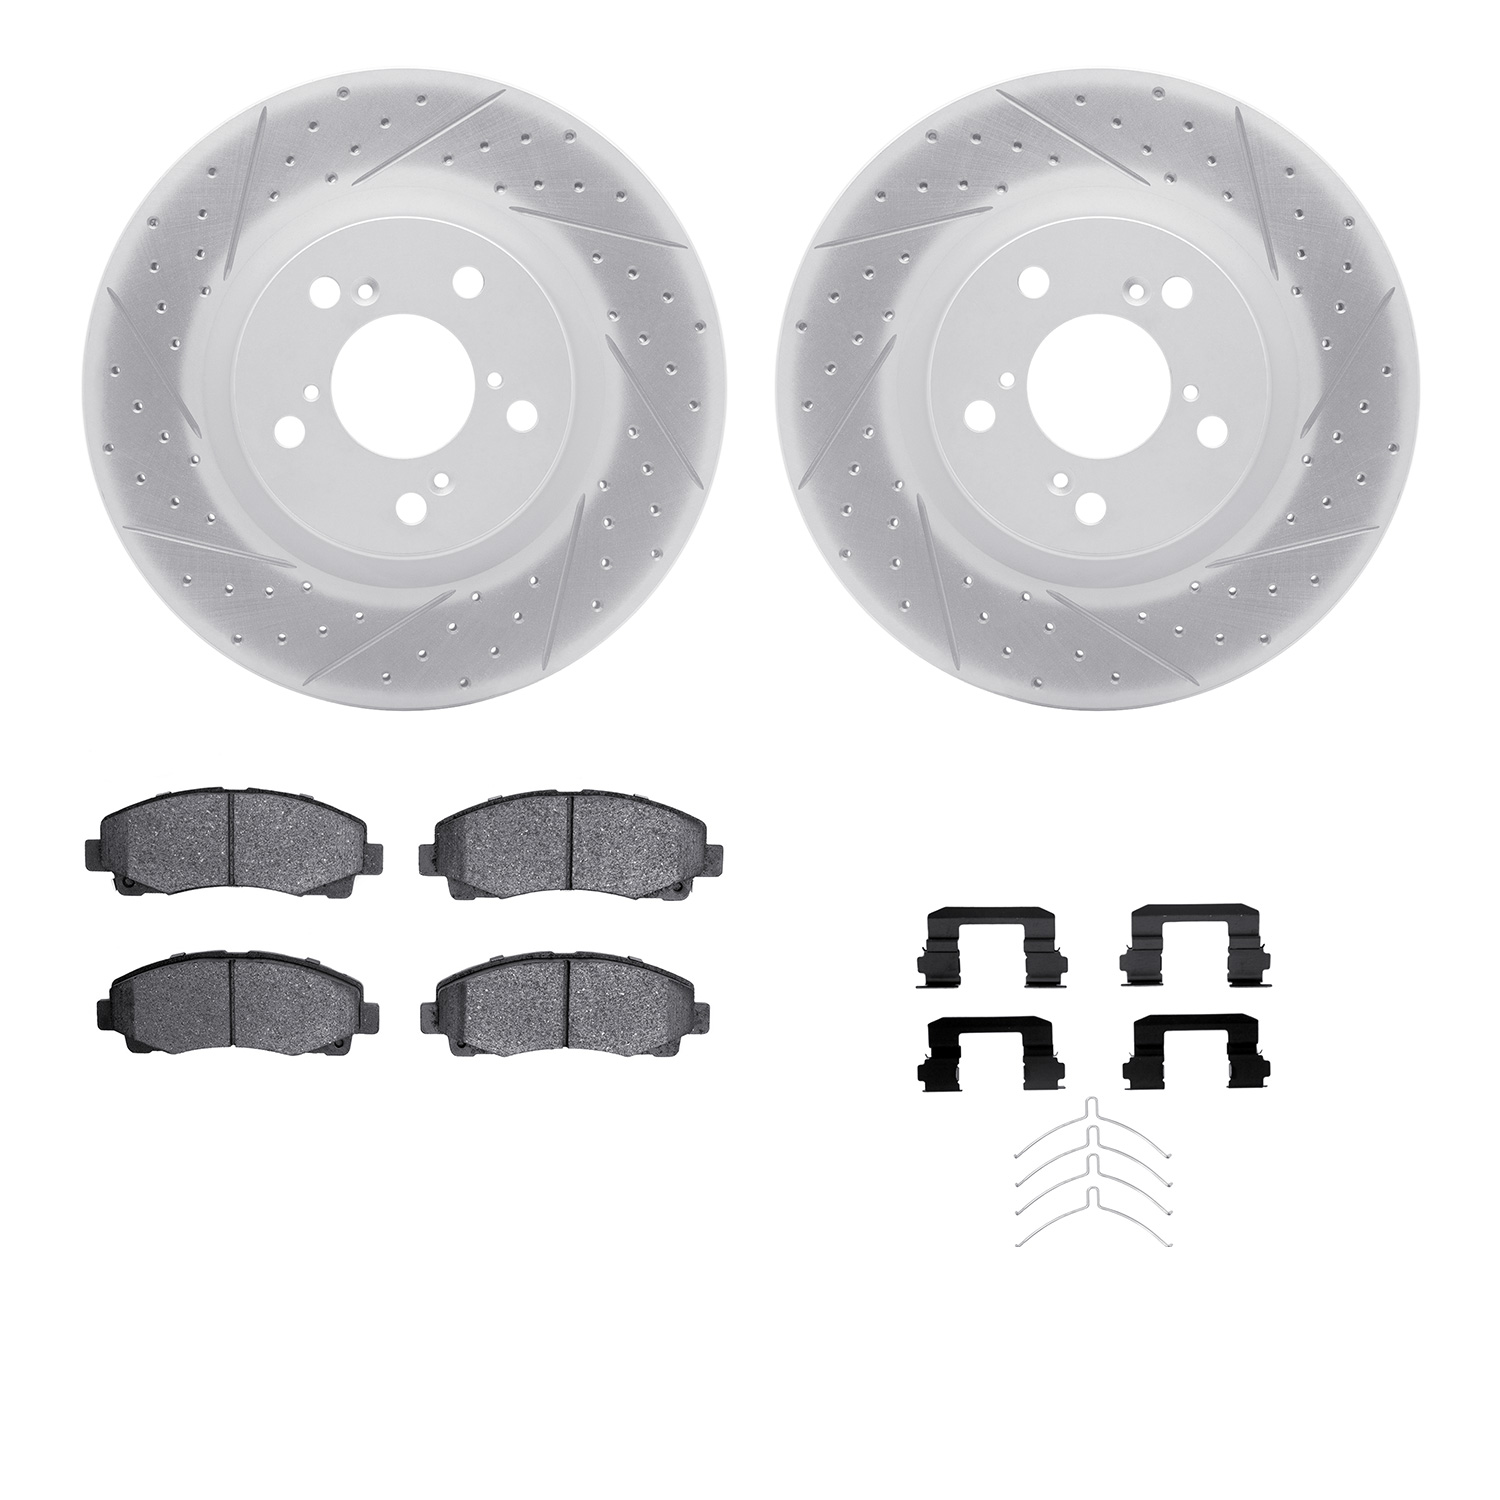 2512-59075 Geoperformance Drilled/Slotted Rotors w/5000 Advanced Brake Pads Kit & Hardware, 2009-2014 Acura/Honda, Position: Fro